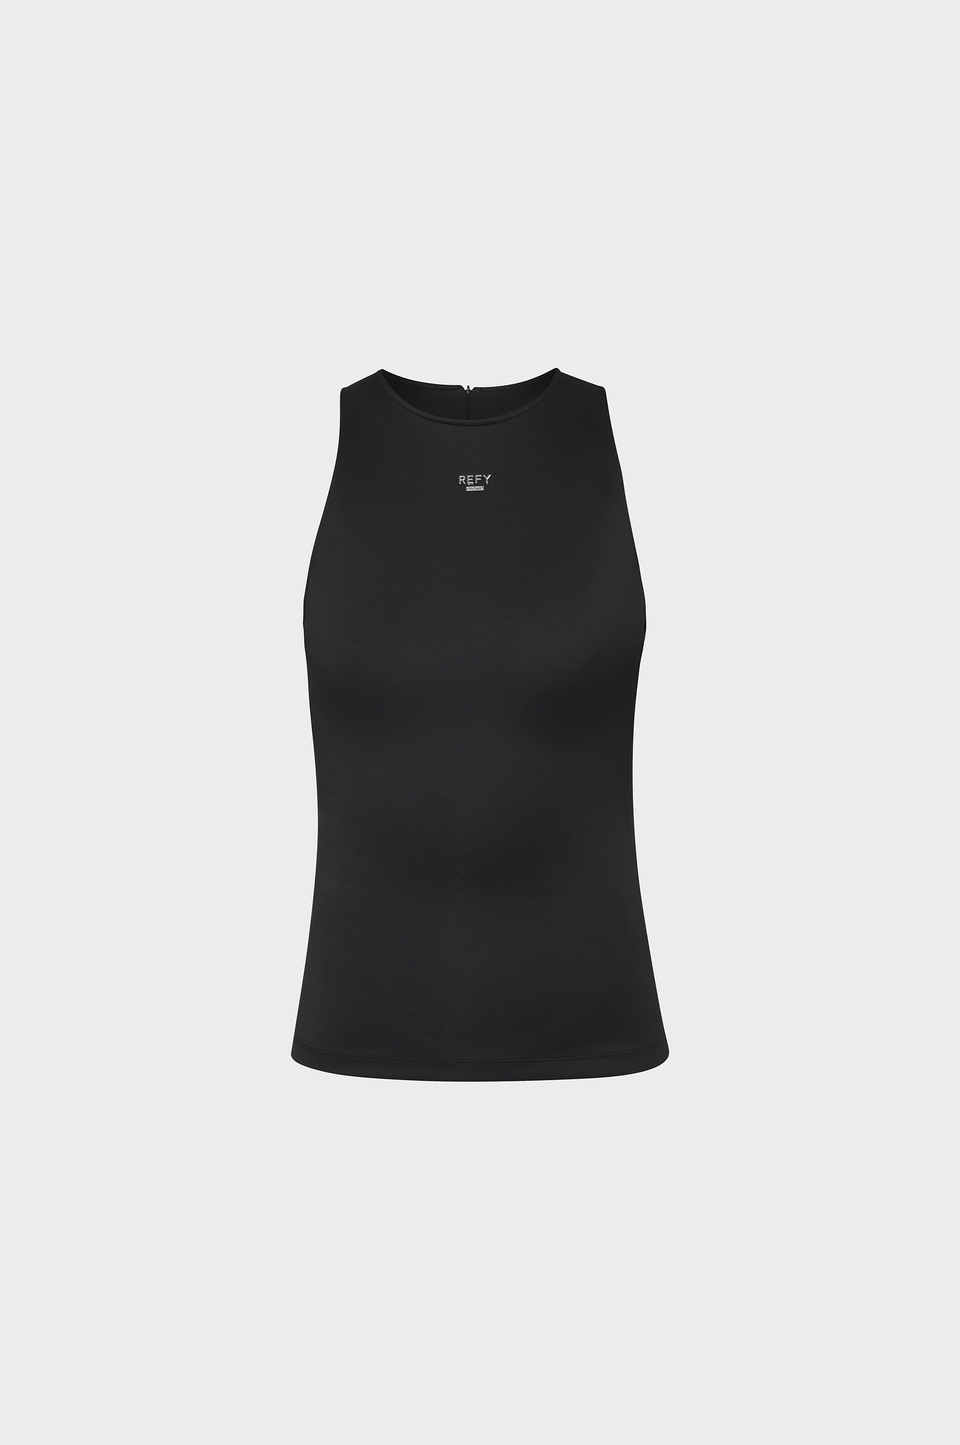 CLOSE UP IMAGE OF REFY FITTED VEST IN BLACK